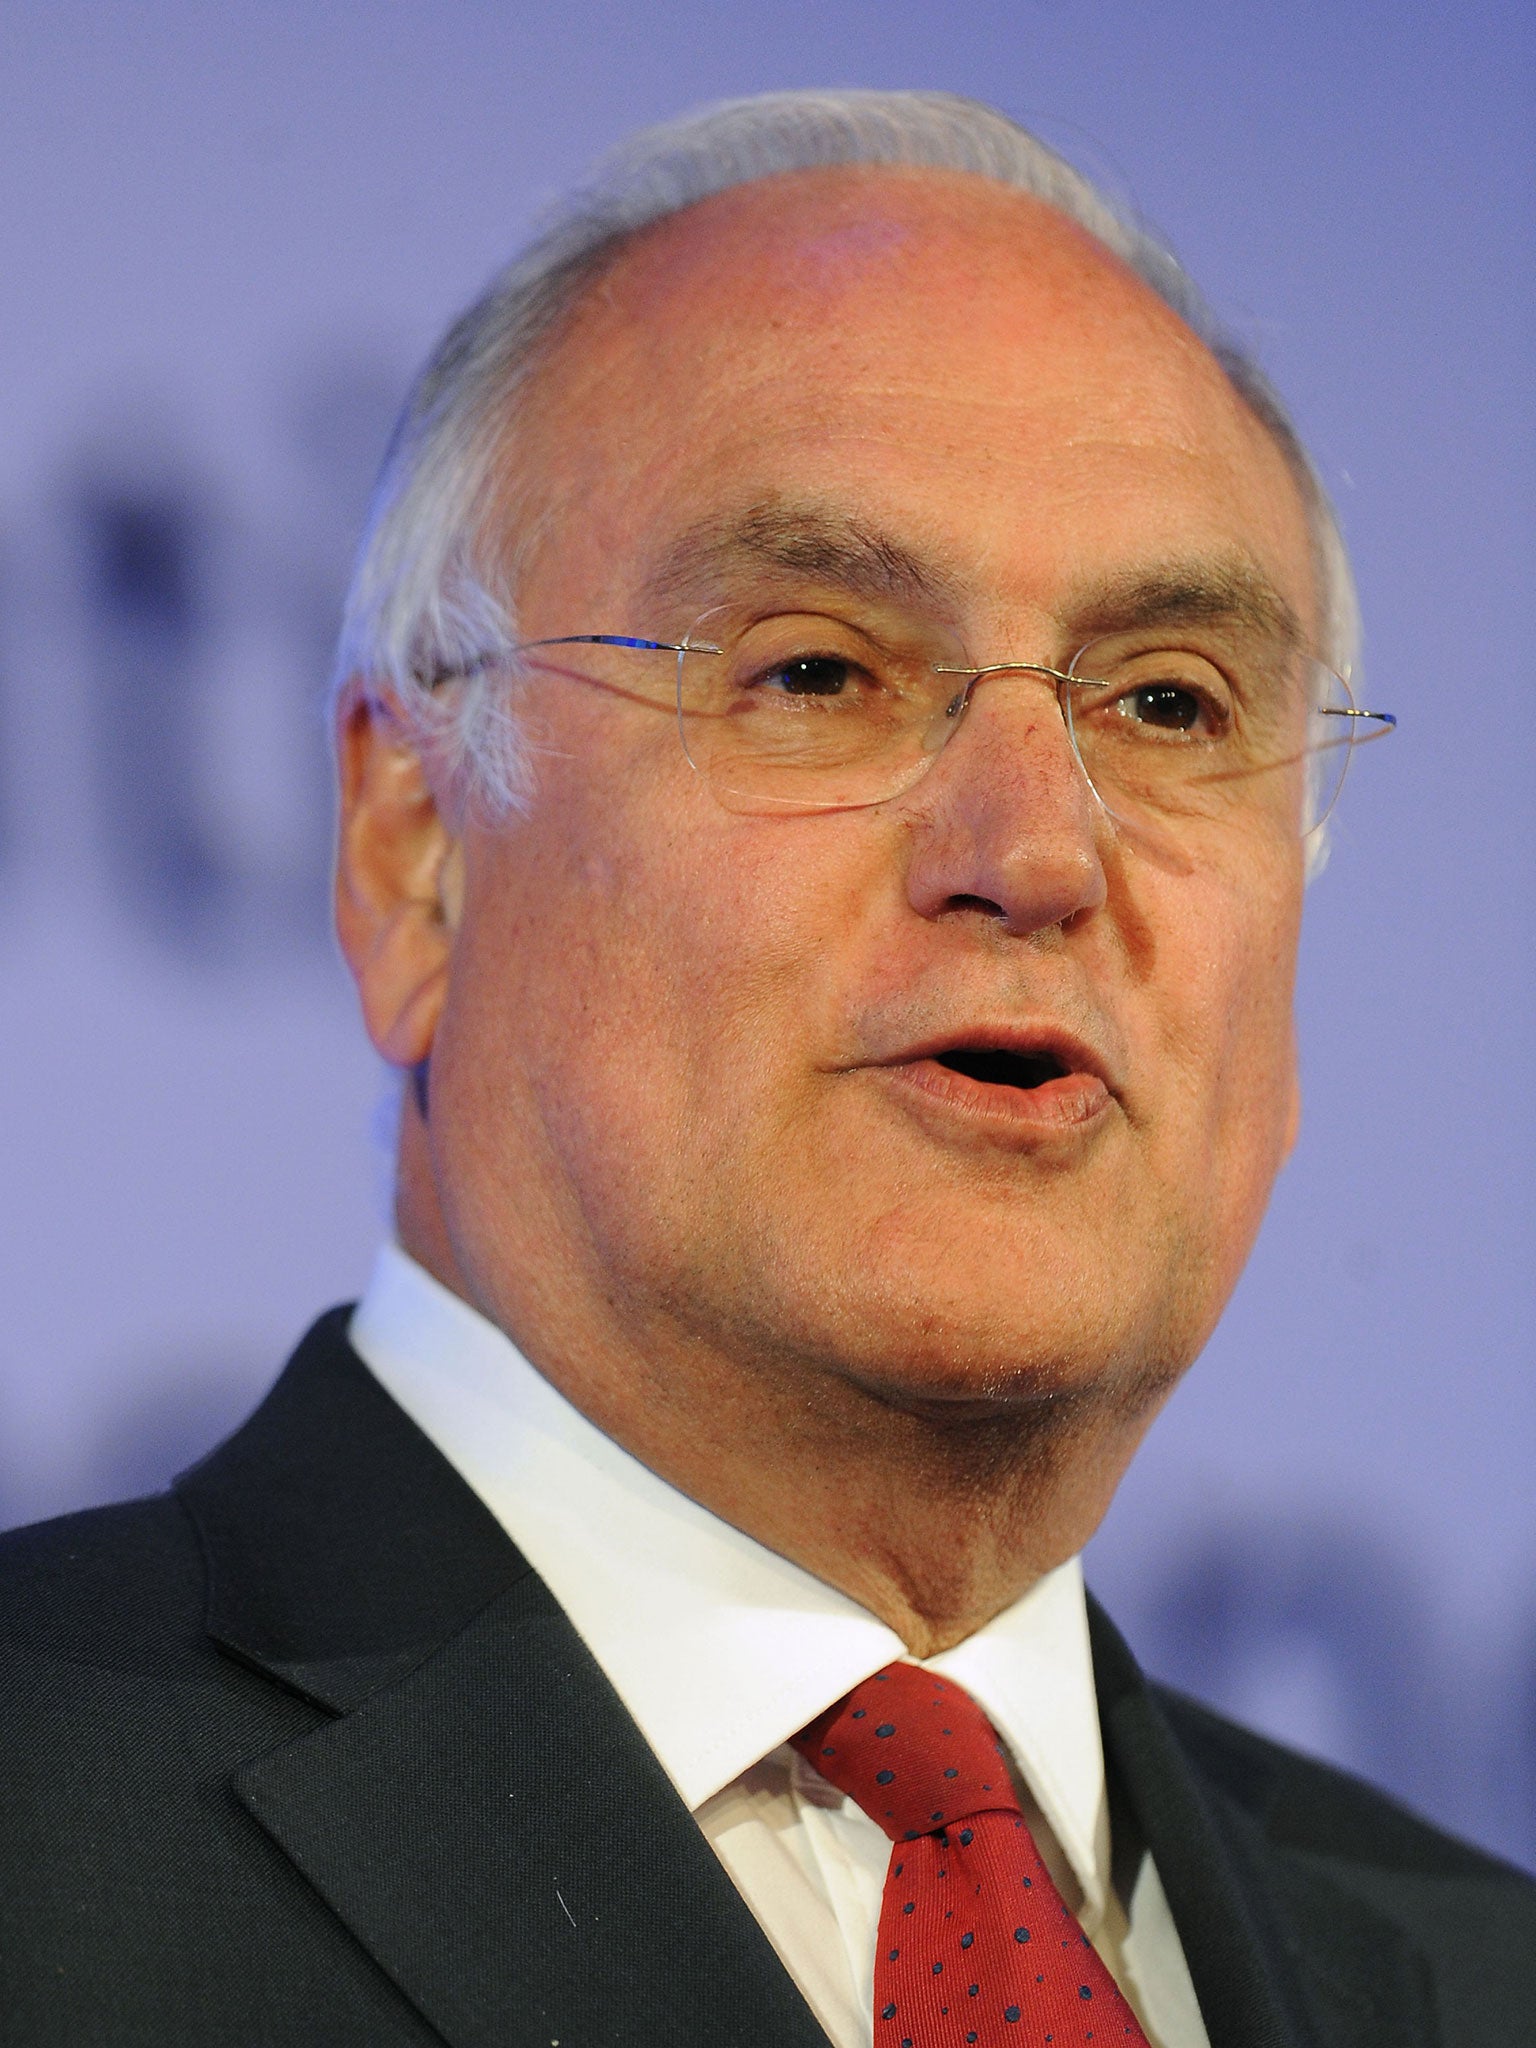 Sir Michael Wilshaw believes “pupils’ physical and educational welfare is at serious risk”